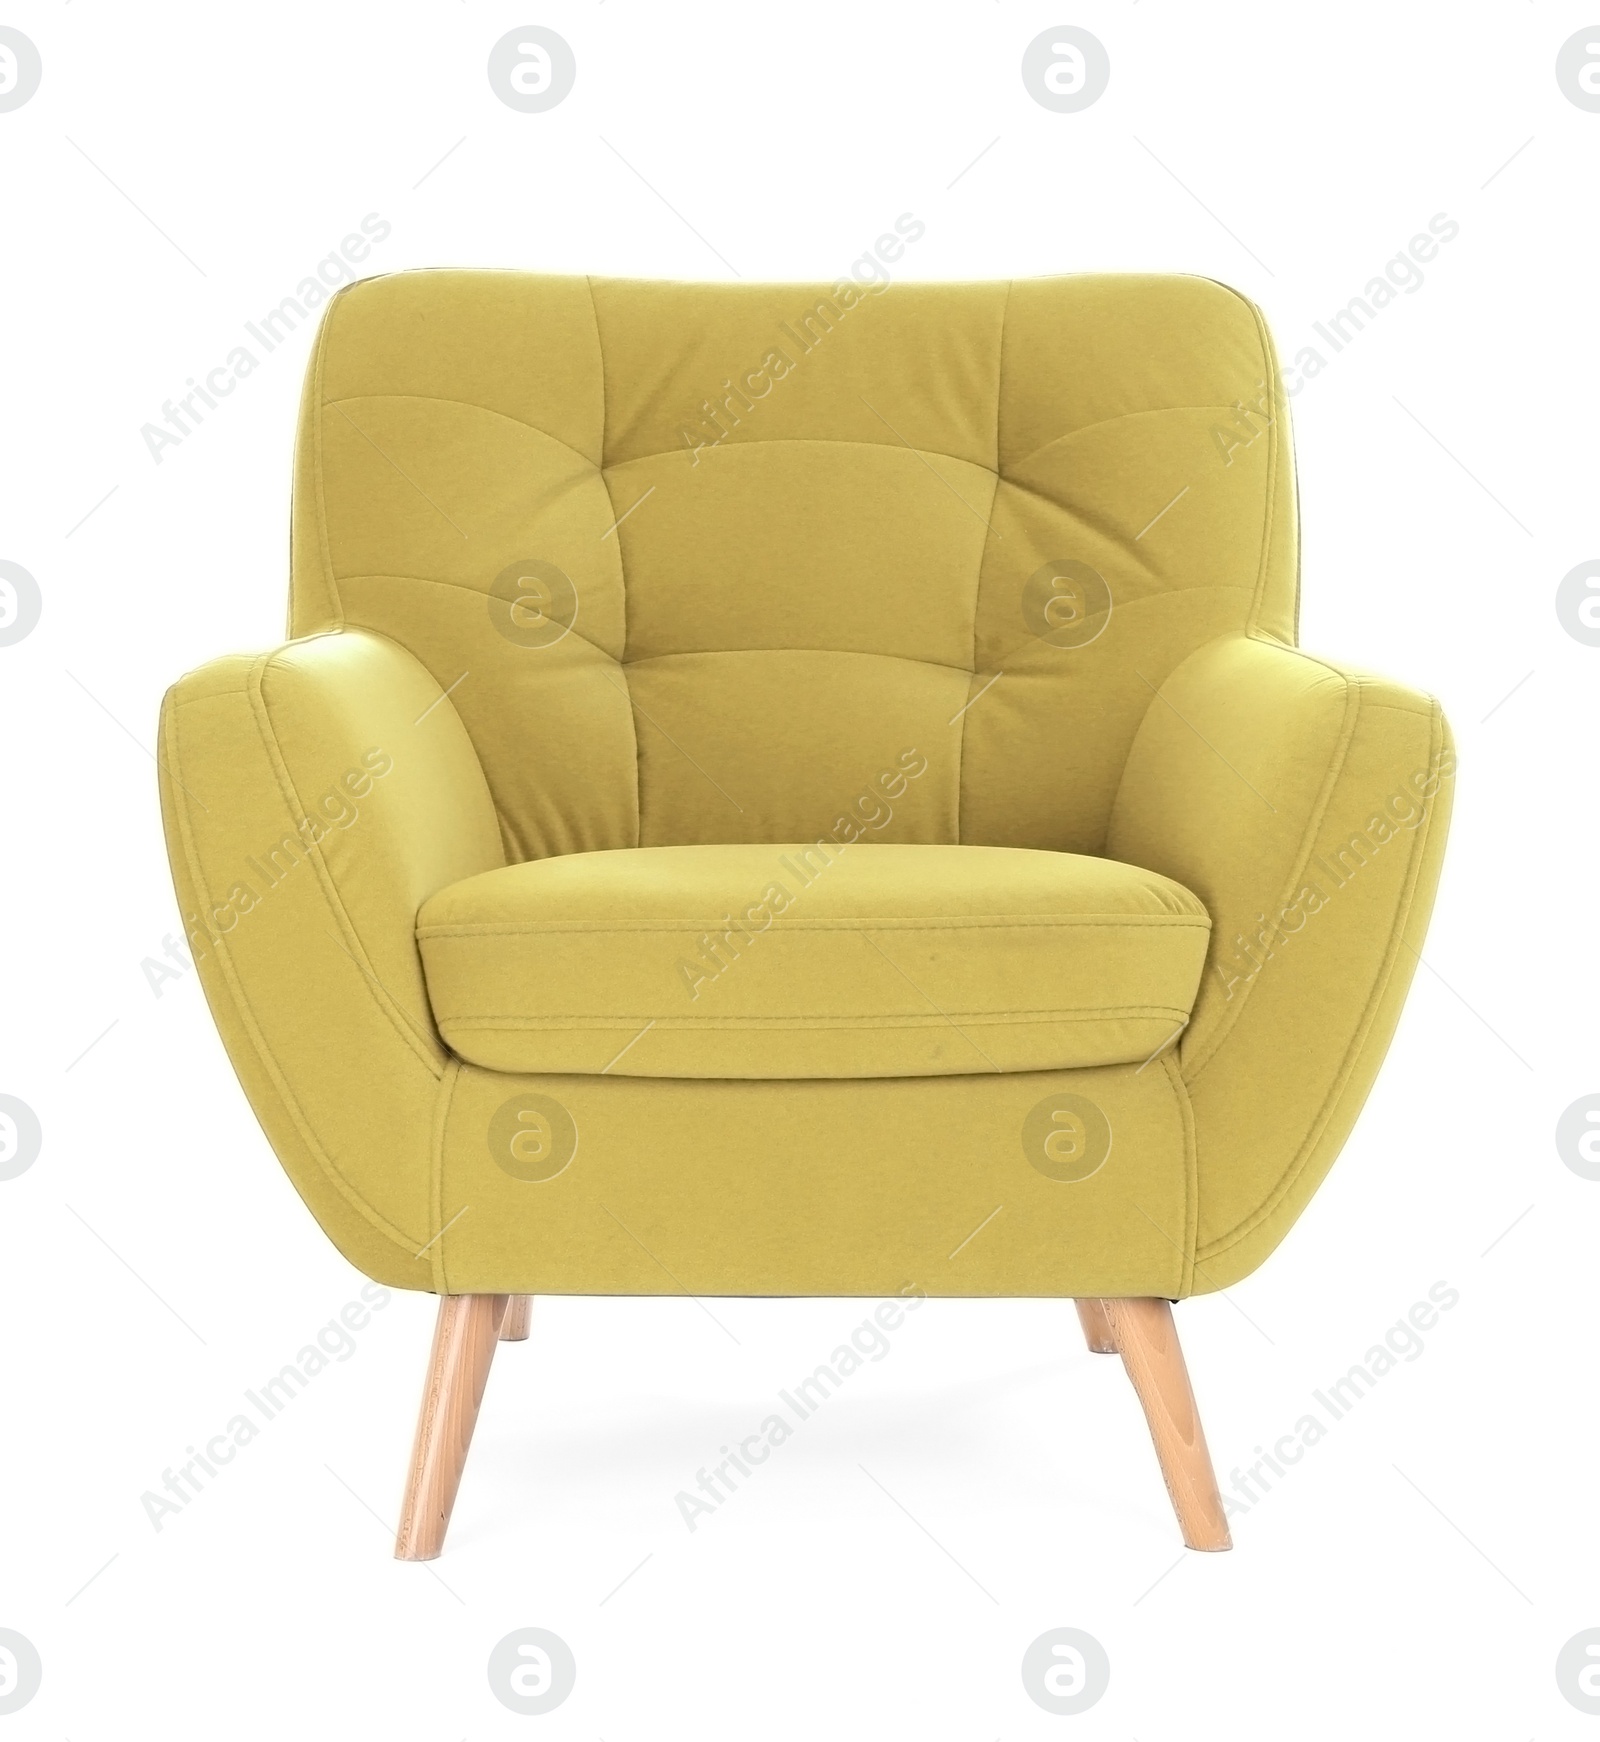 Image of One comfortable yellow armchair isolated on white